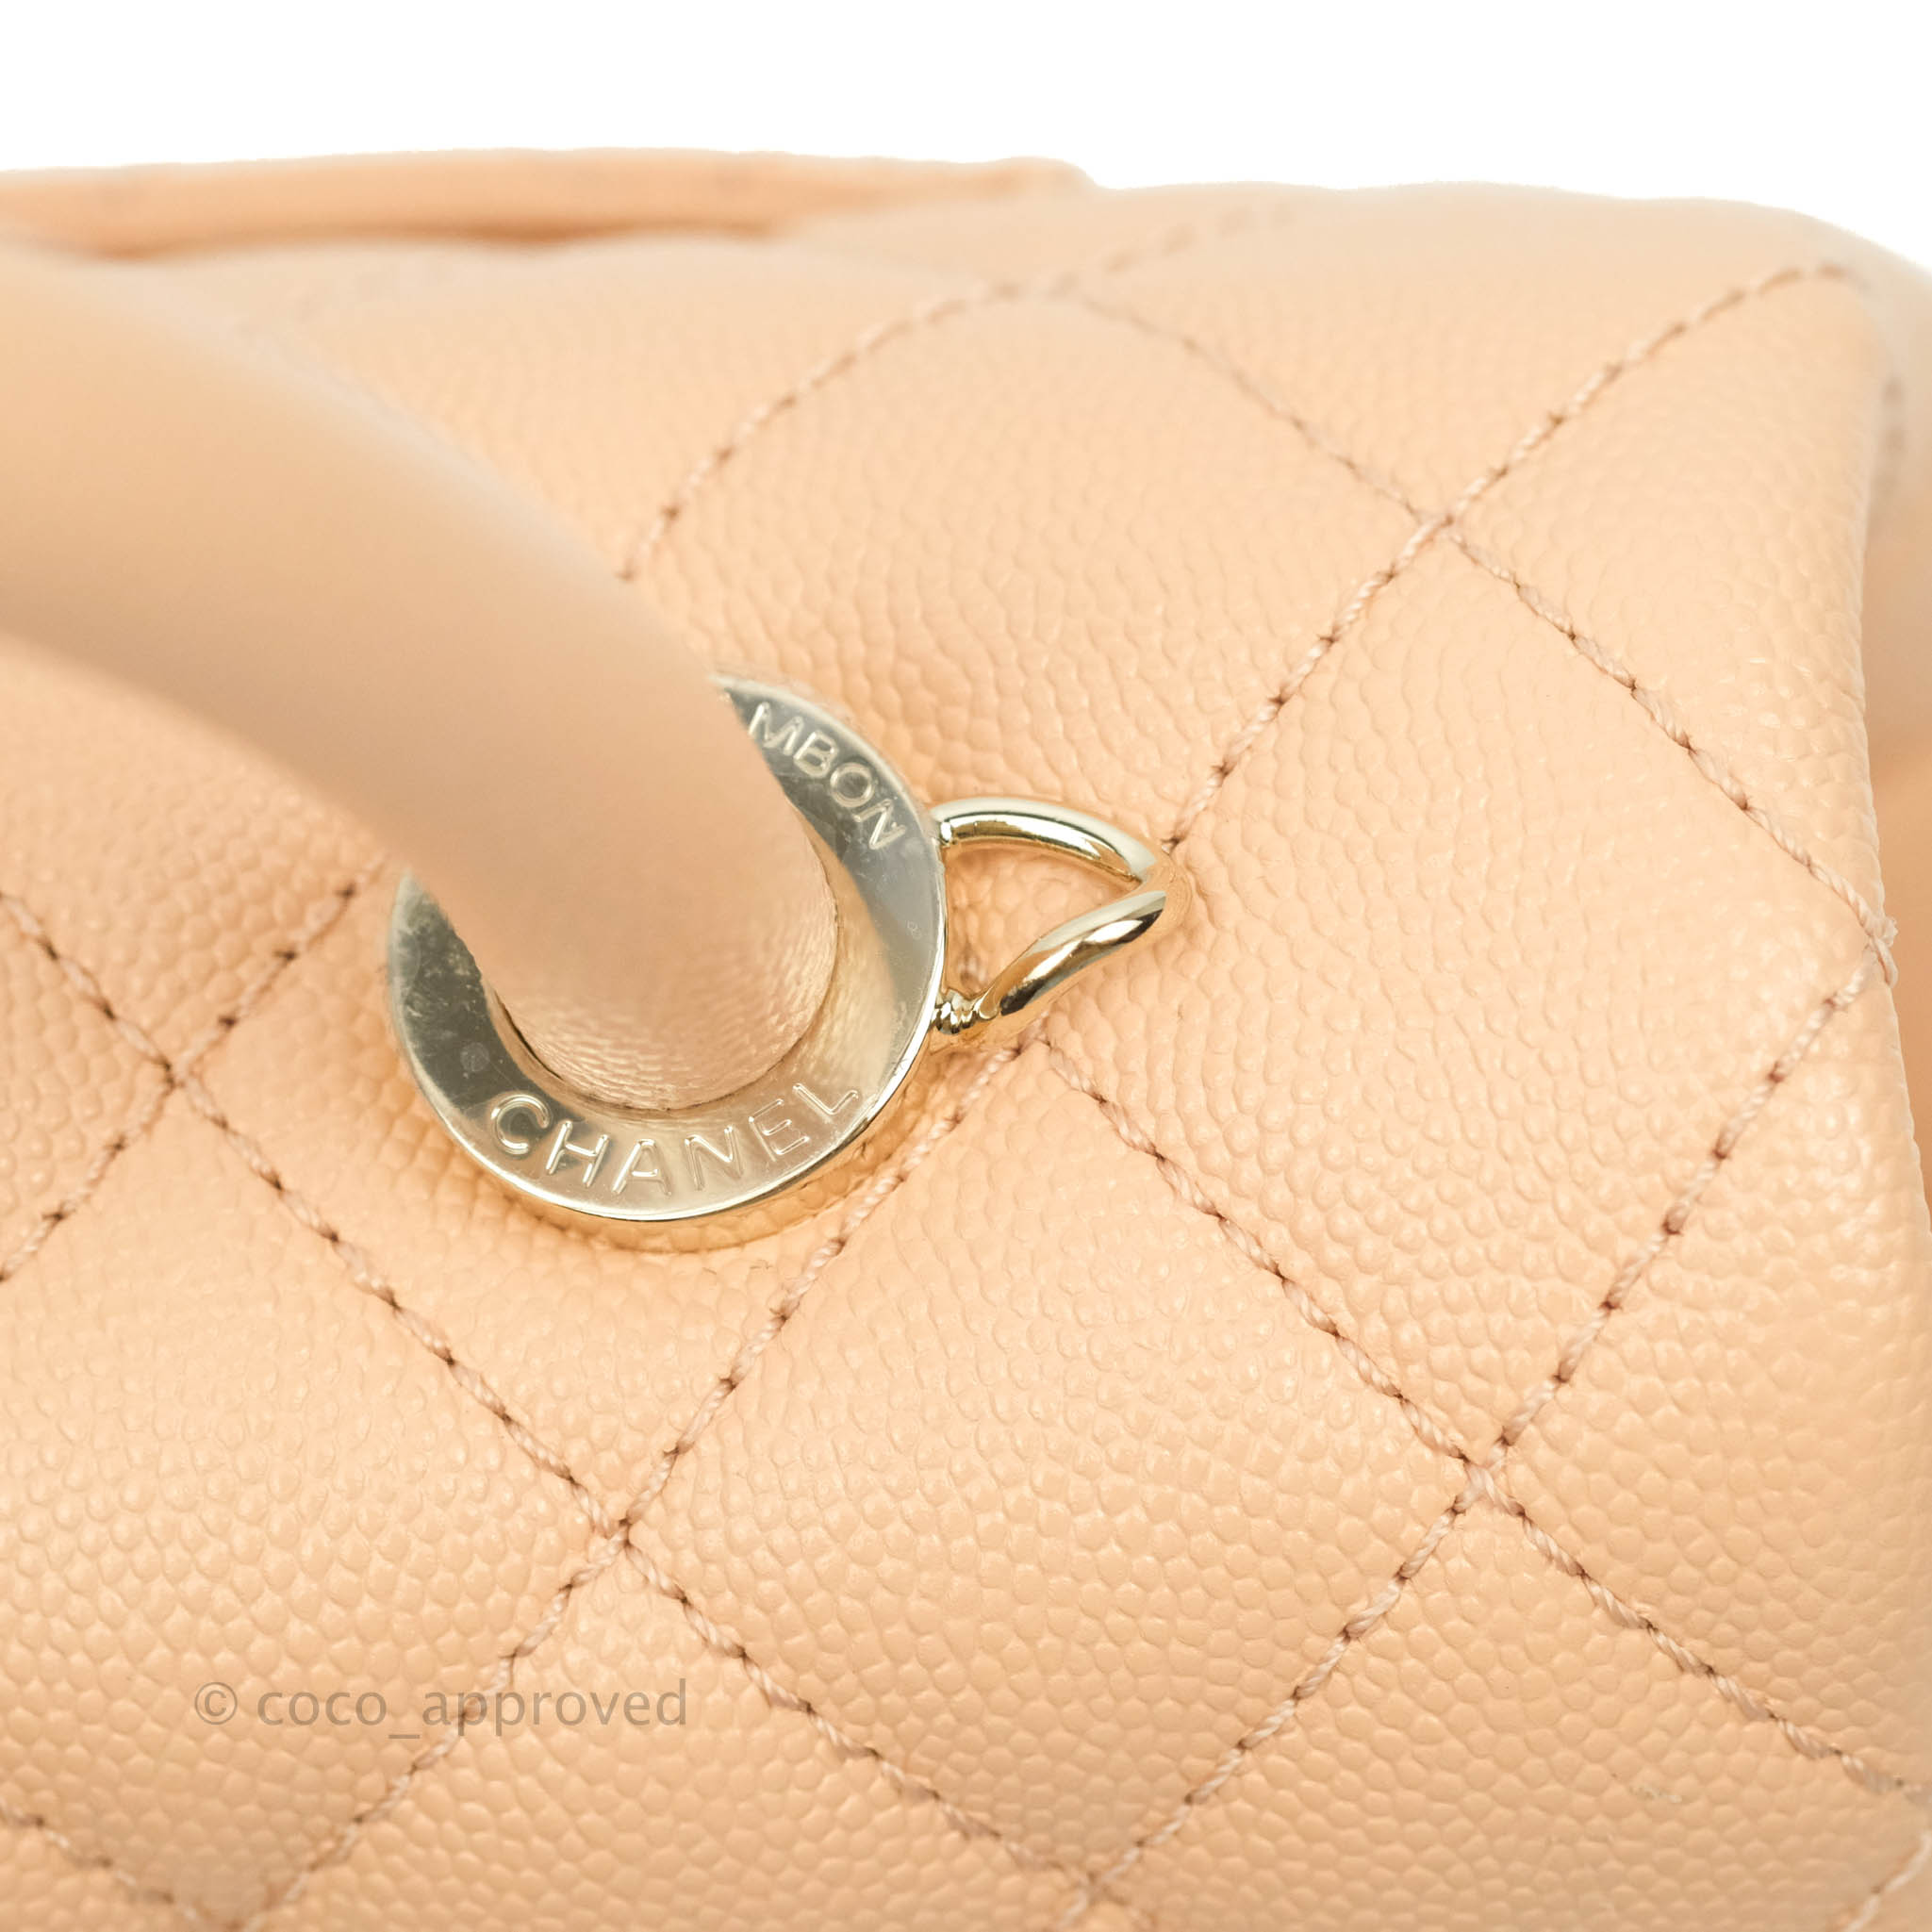 Chanel Small Coco Handle Flap Light Pink Caviar Light Gold